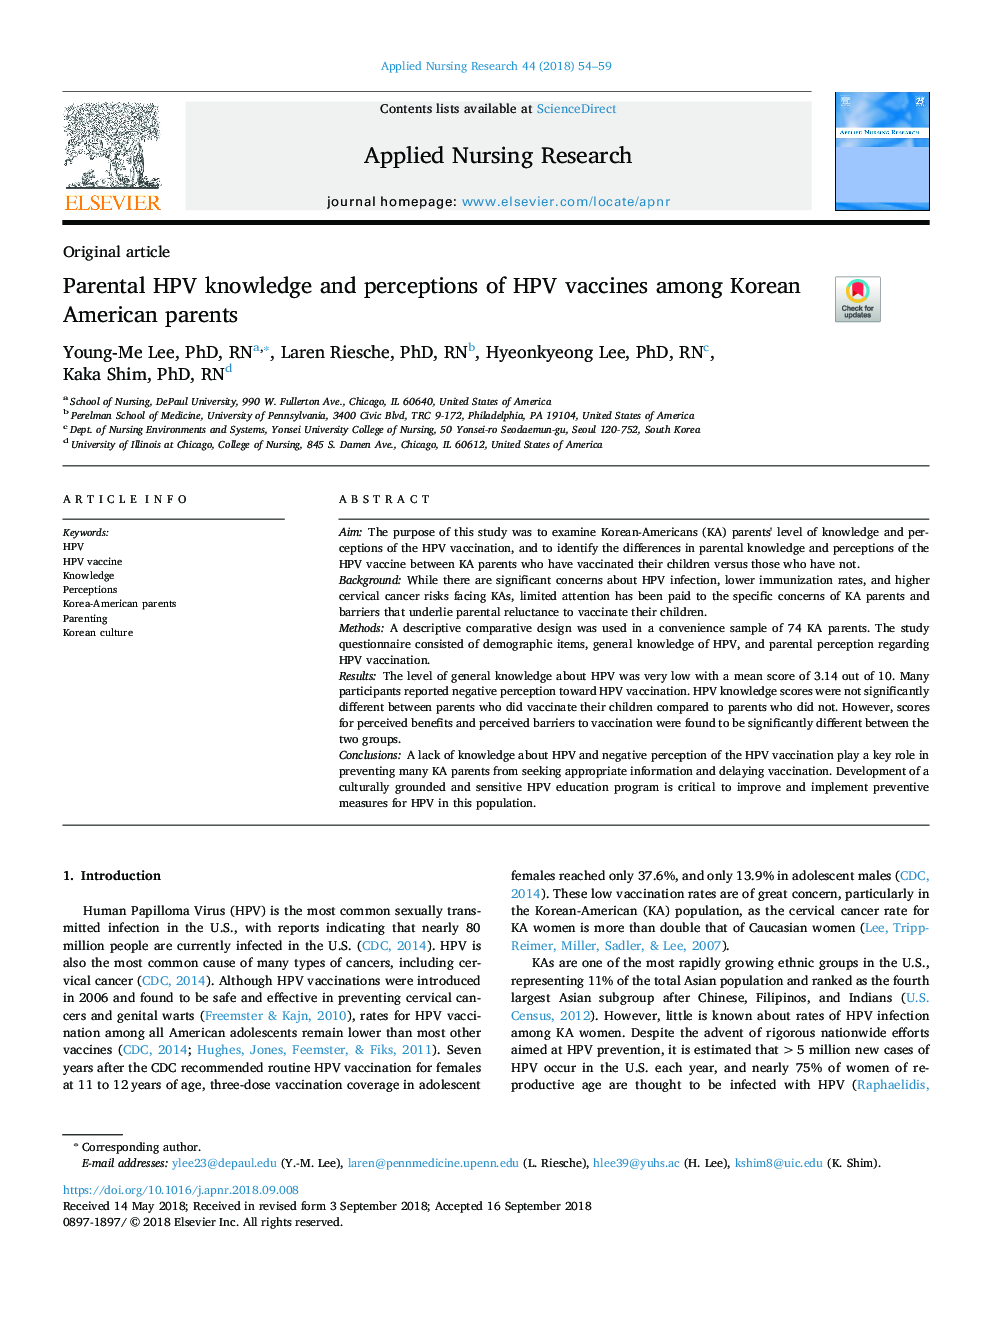 Parental HPV knowledge and perceptions of HPV vaccines among Korean American parents